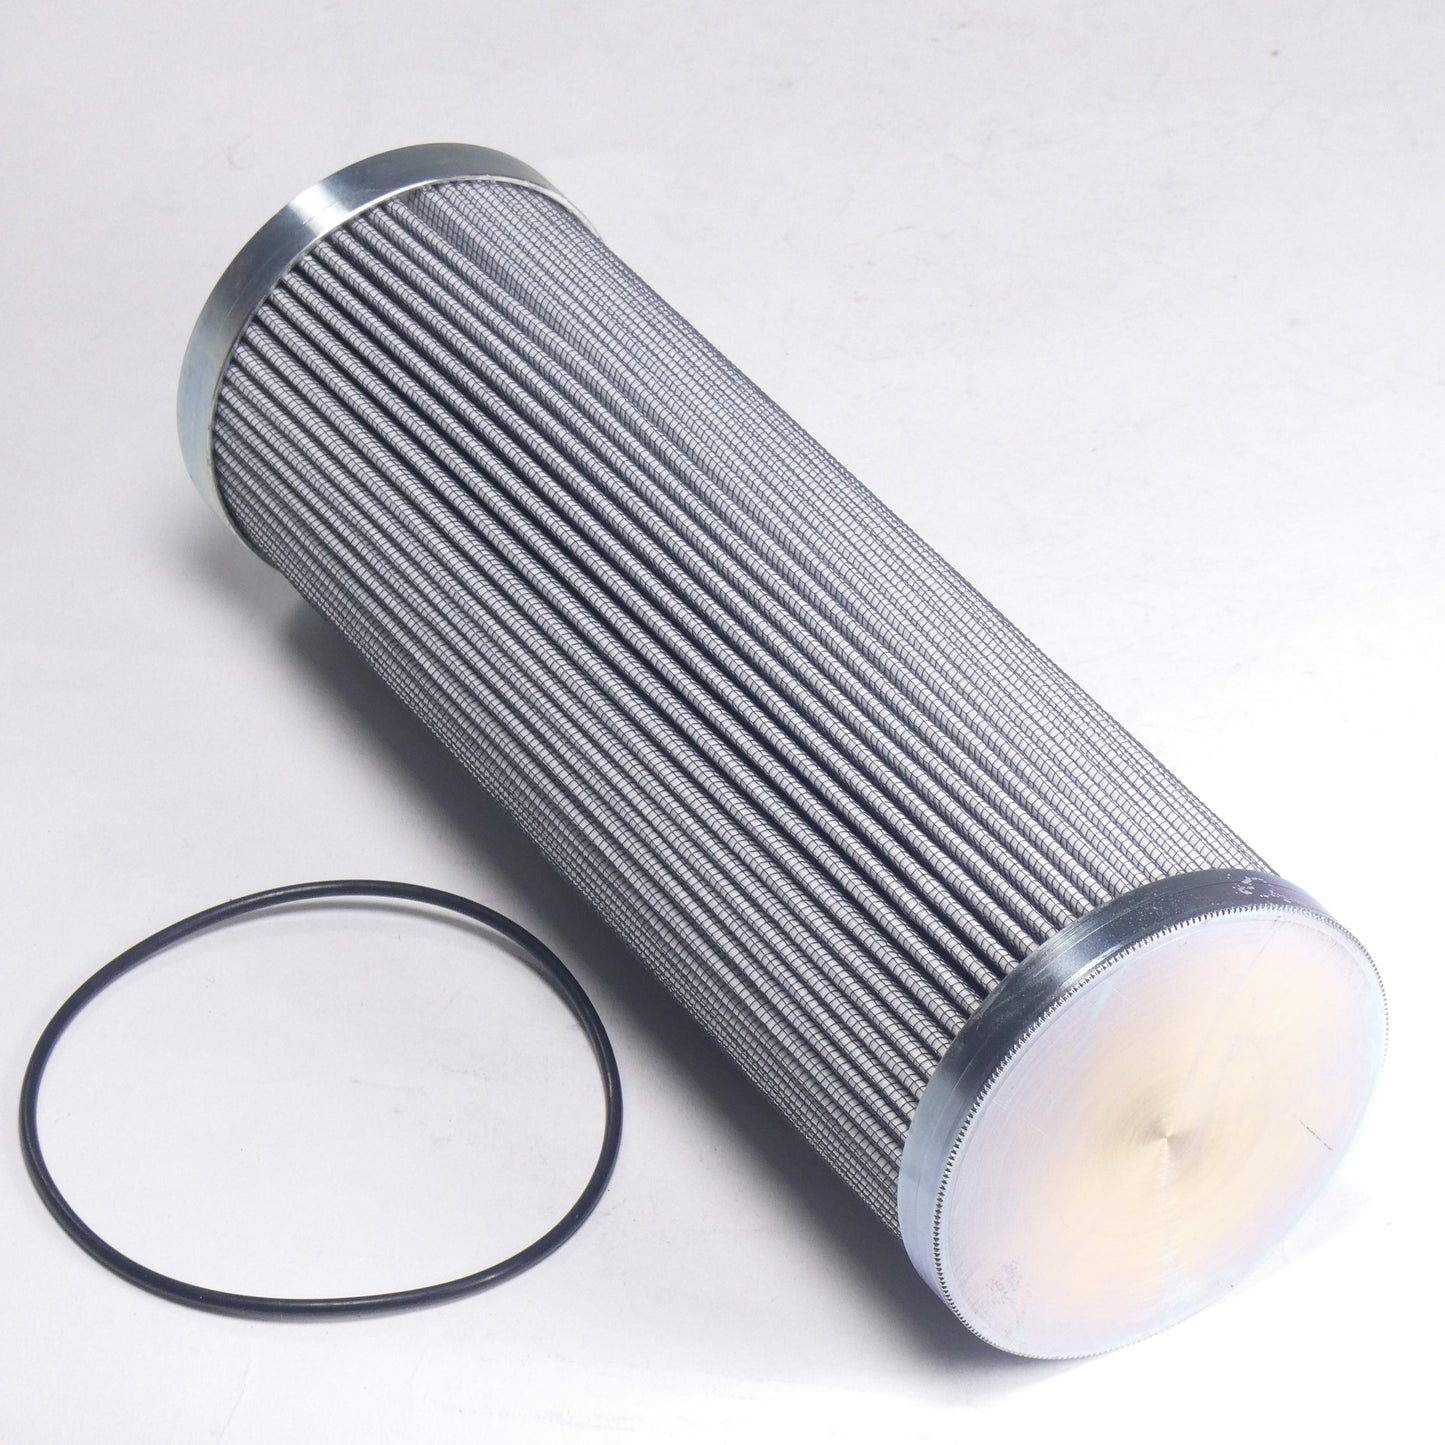 Hydrafil Replacement Filter Element for Argo V3.0833-18